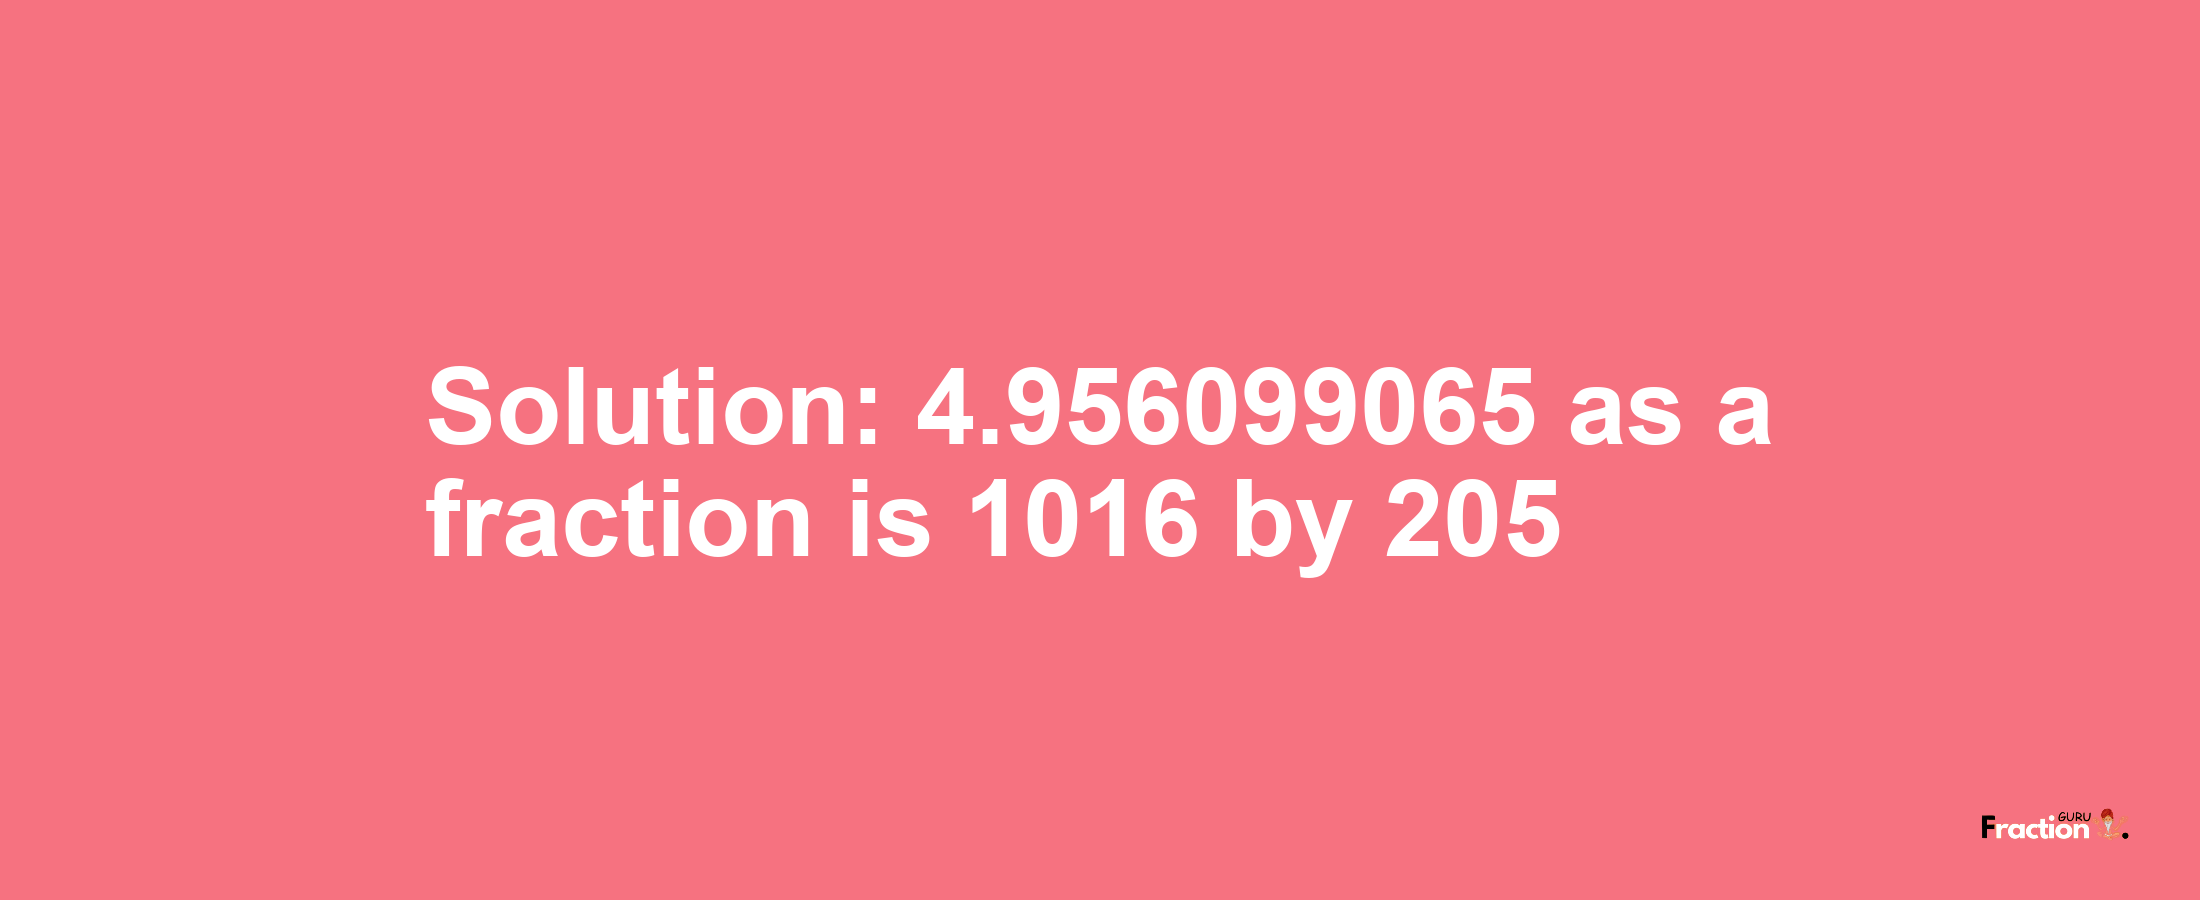 Solution:4.956099065 as a fraction is 1016/205